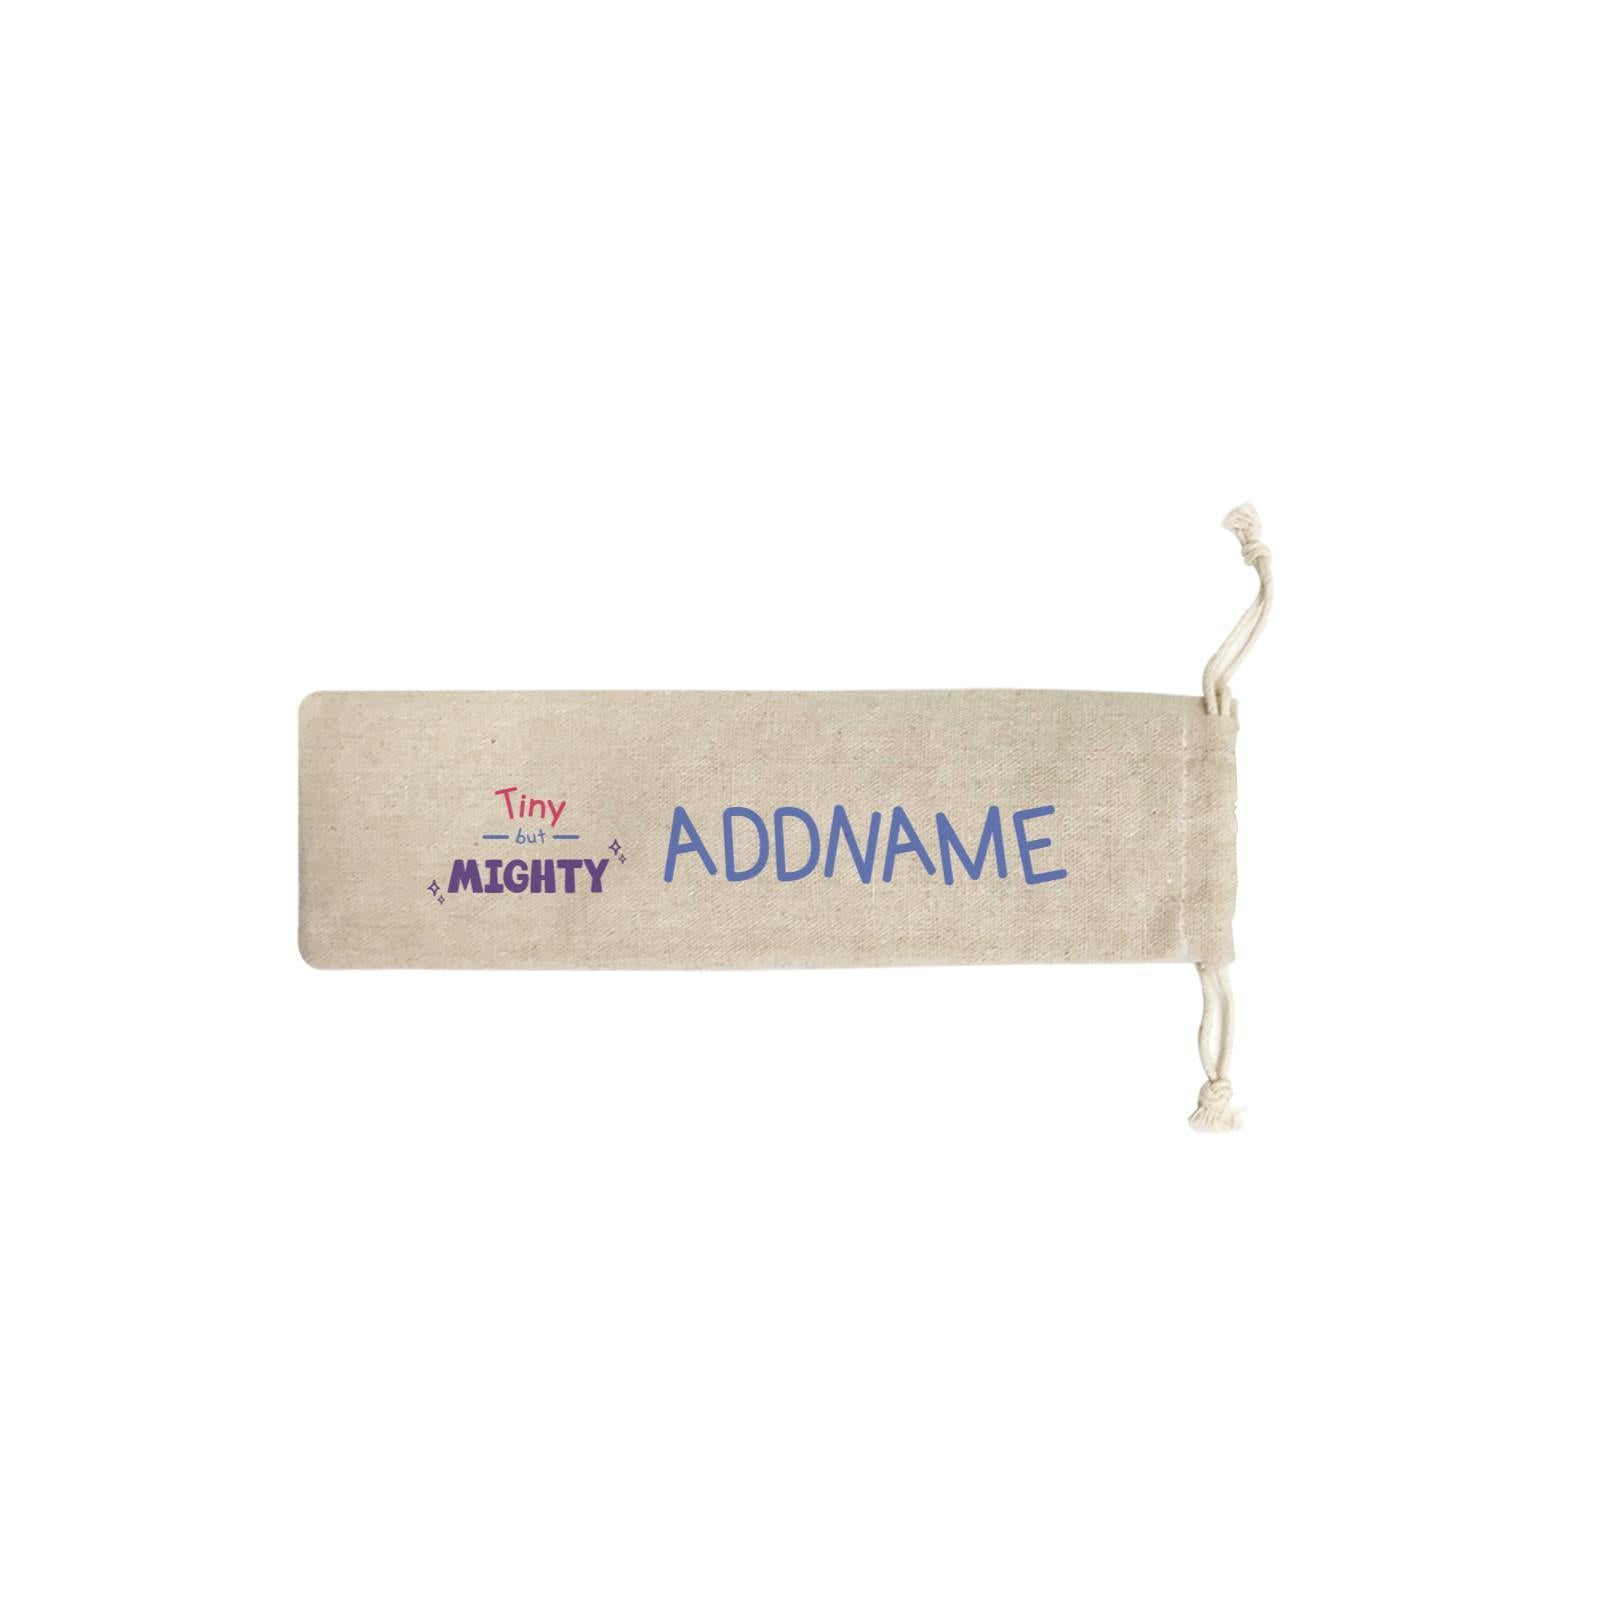 Children's Day Gift Series Tiny But Mighty Addname SB Straw Pouch (No Straws included)